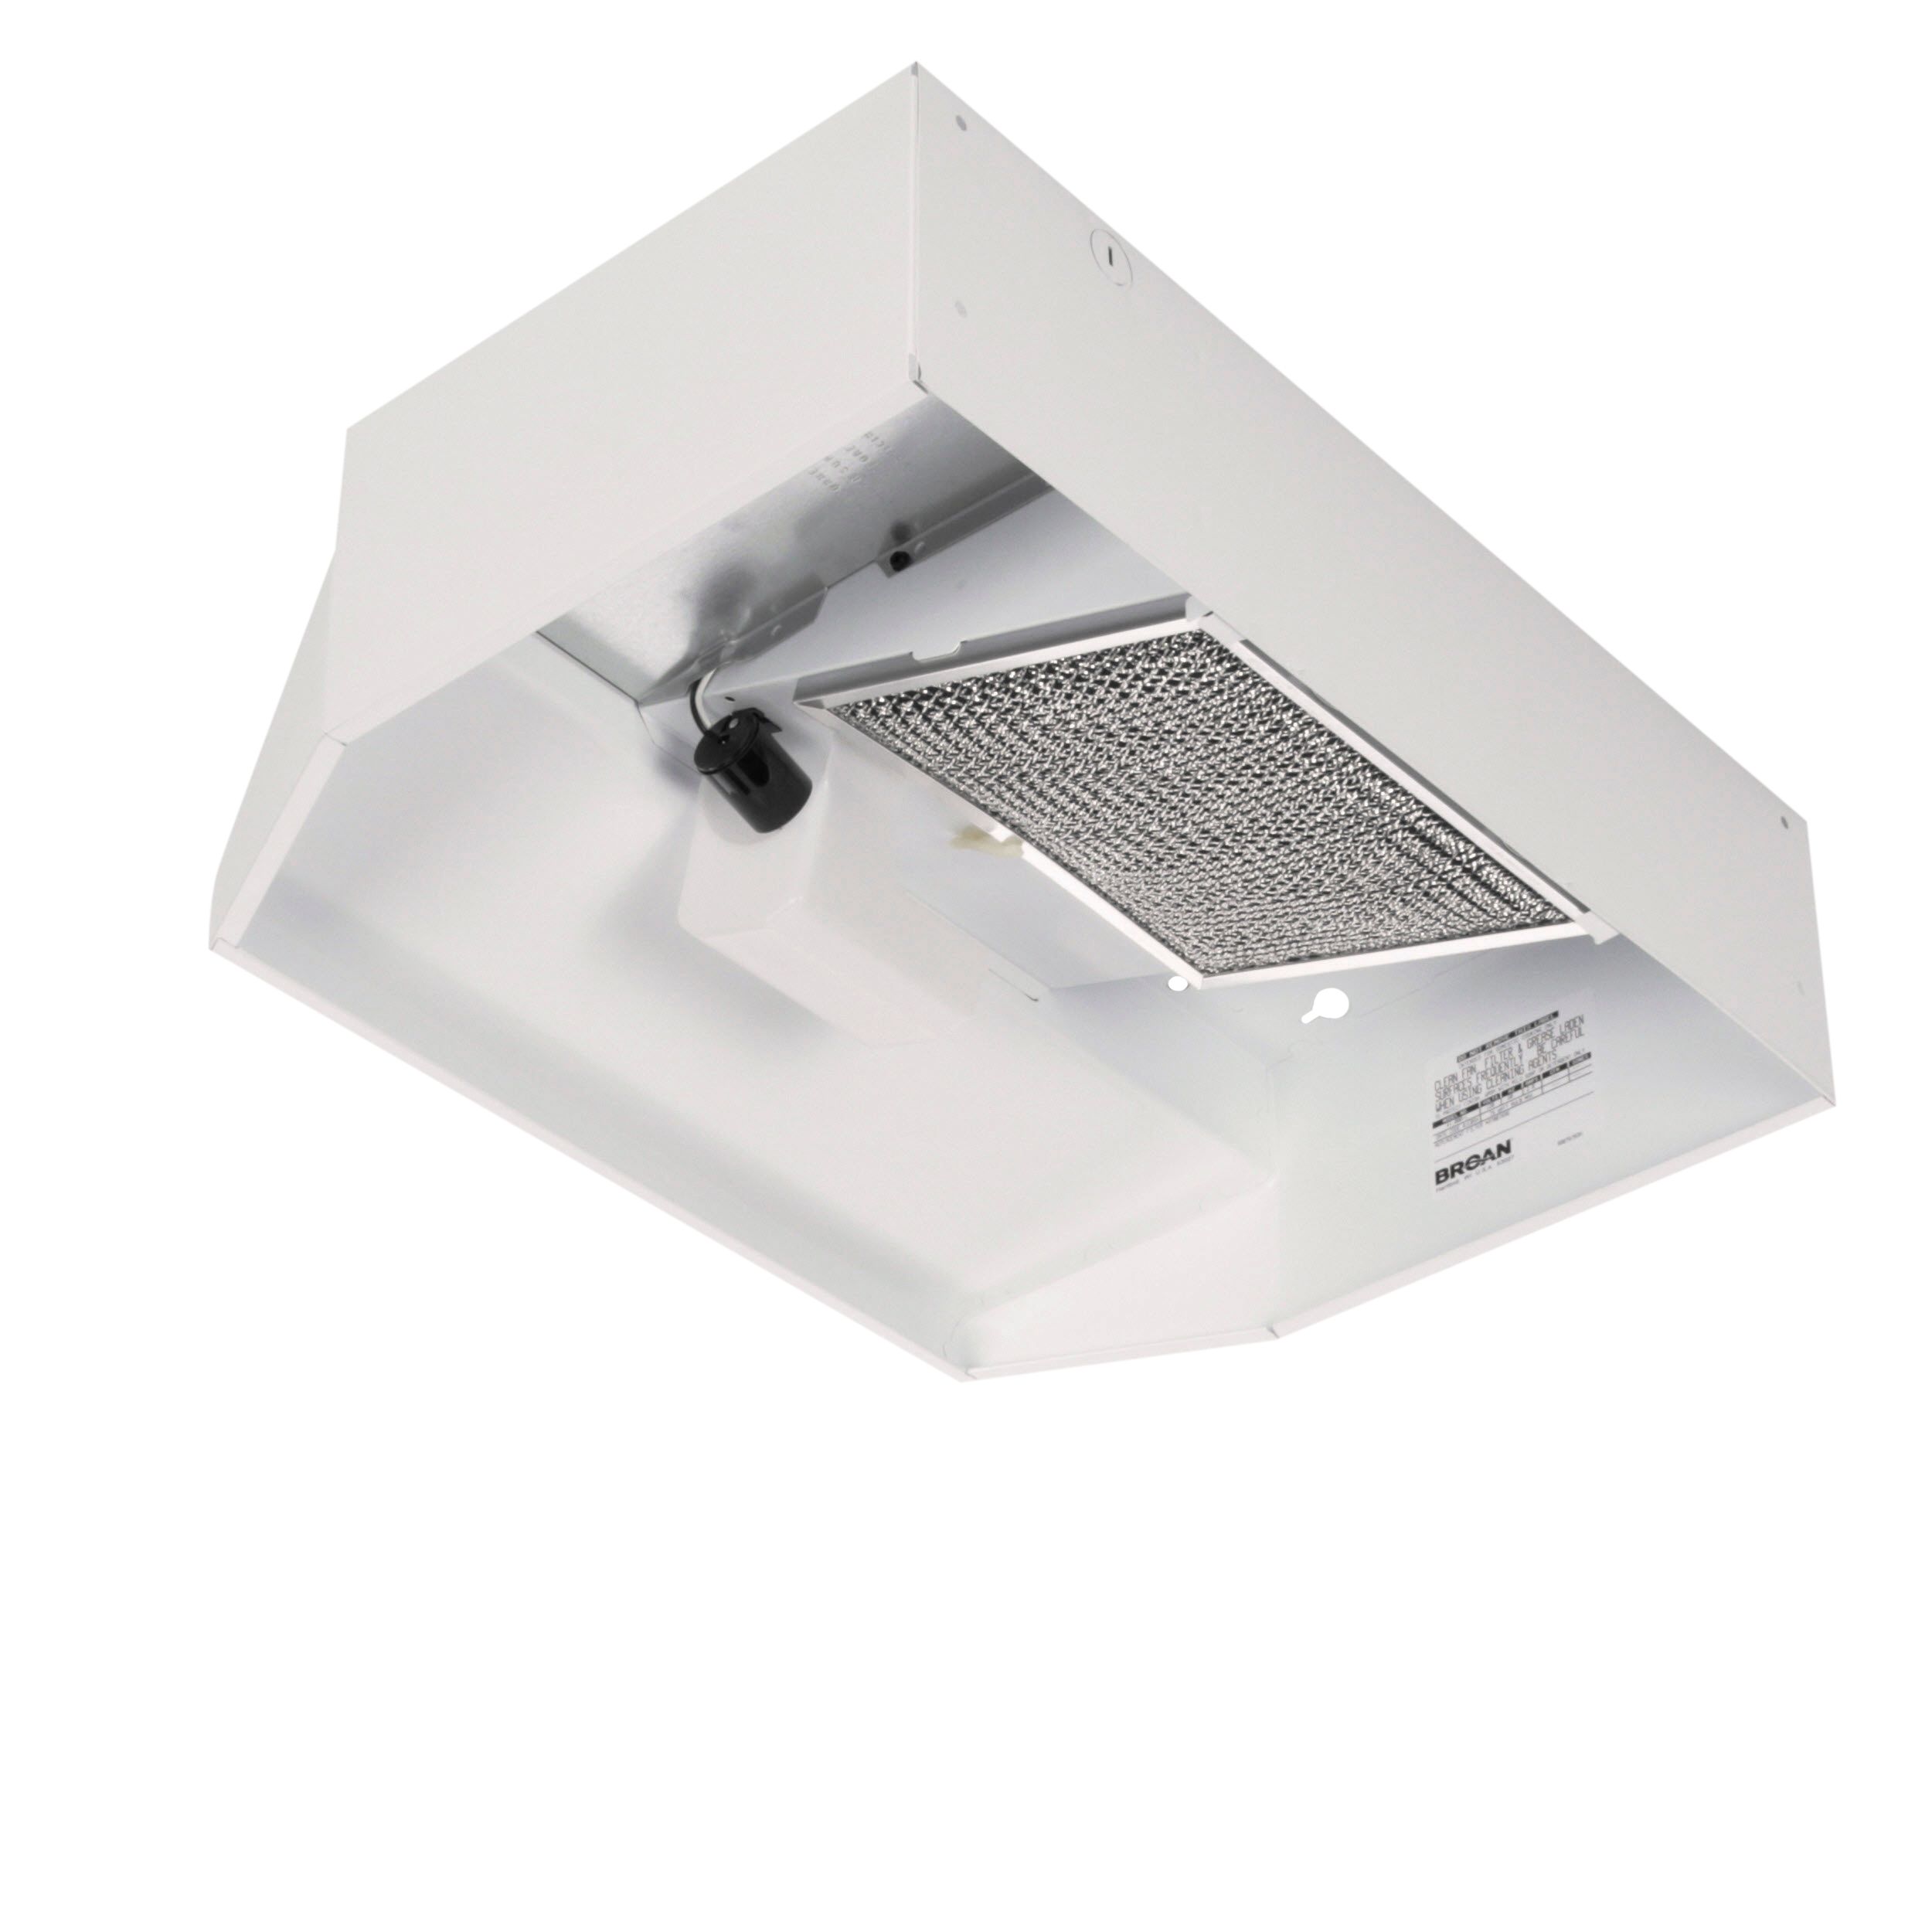 412401 by Broan - Broan® 24-Inch Ductless Under-Cabinet Range Hood, White